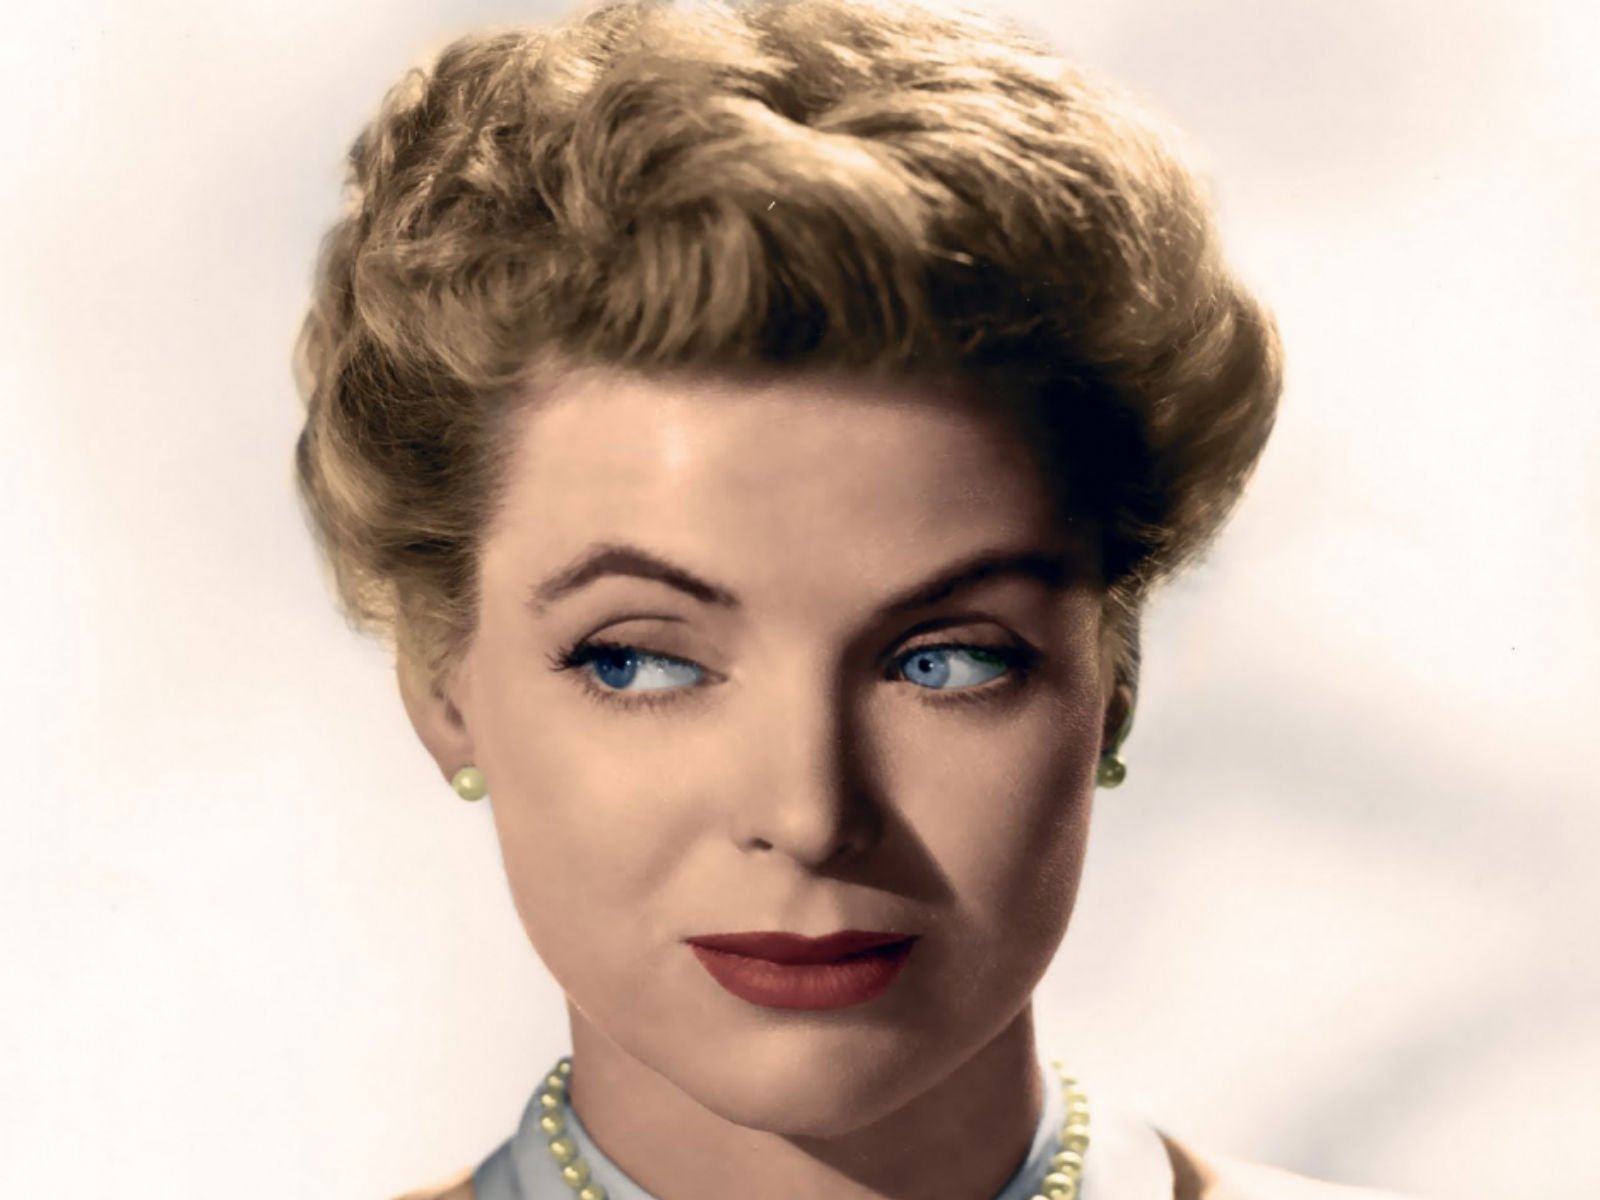 Dorothy McGuire Is Survived by Daughter Topo Swope Who Inherited Mother’s Beauty and Continues Her Legacy